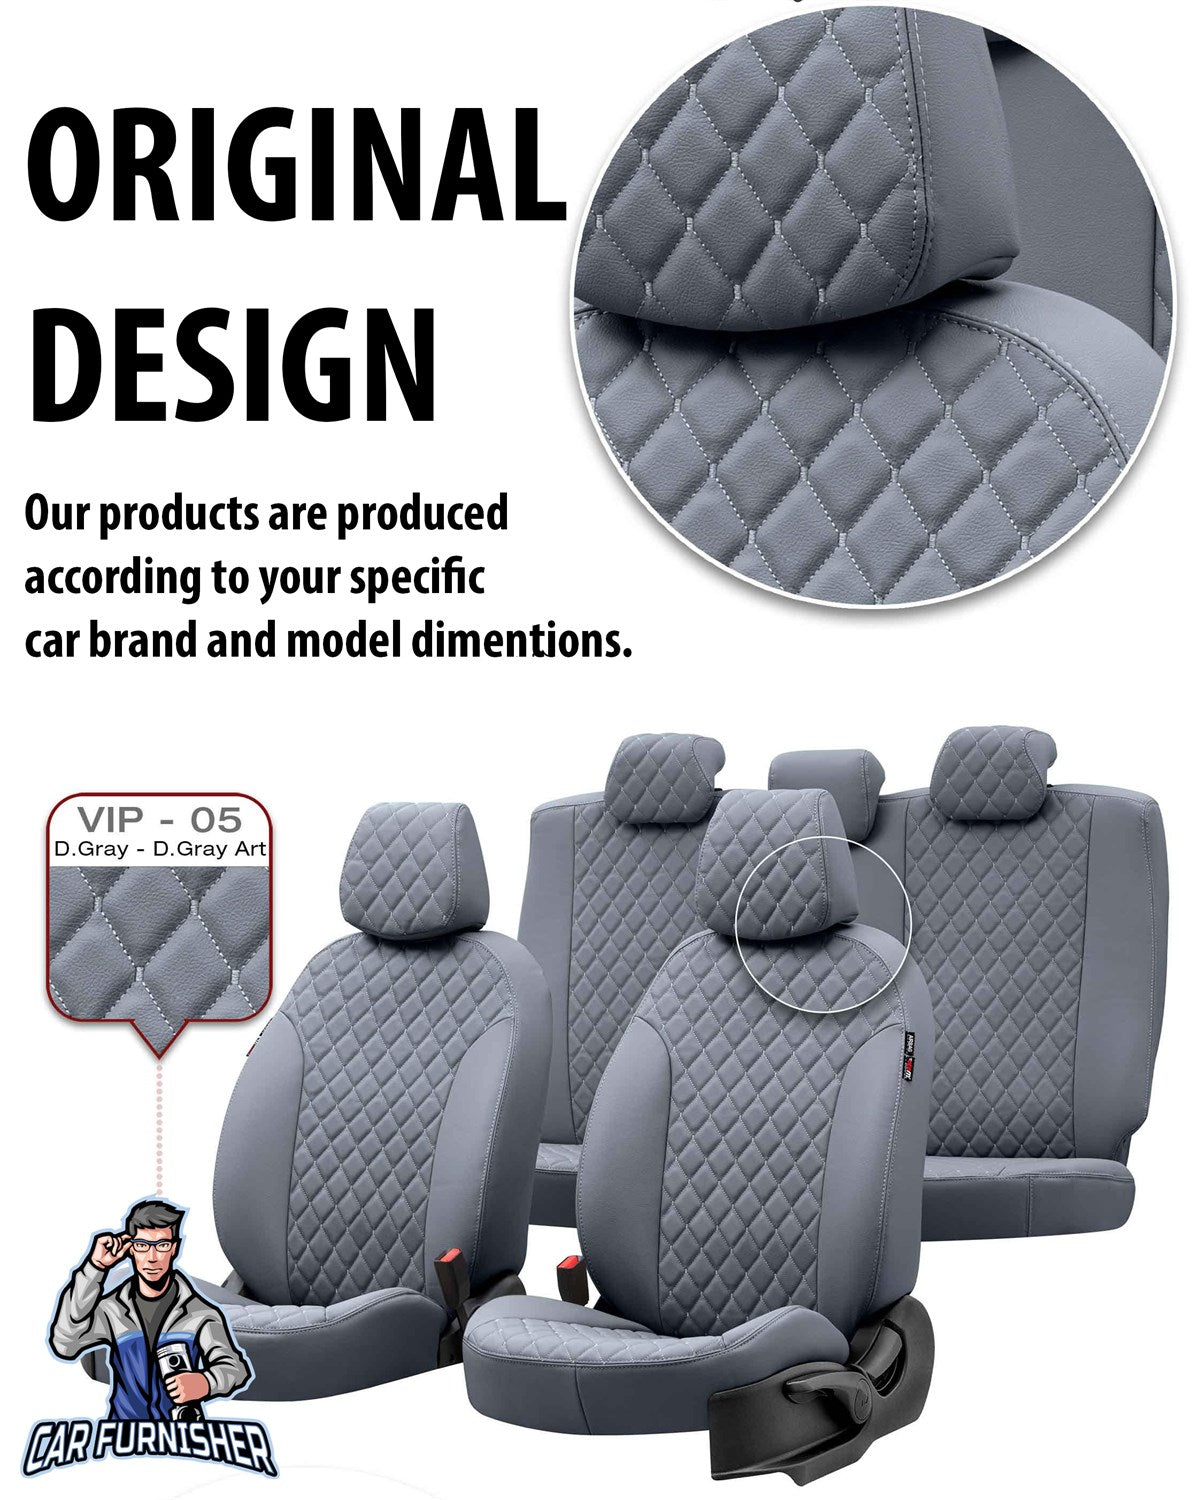 Toyota Verso Seat Cover Madrid Leather Design Beige Leather